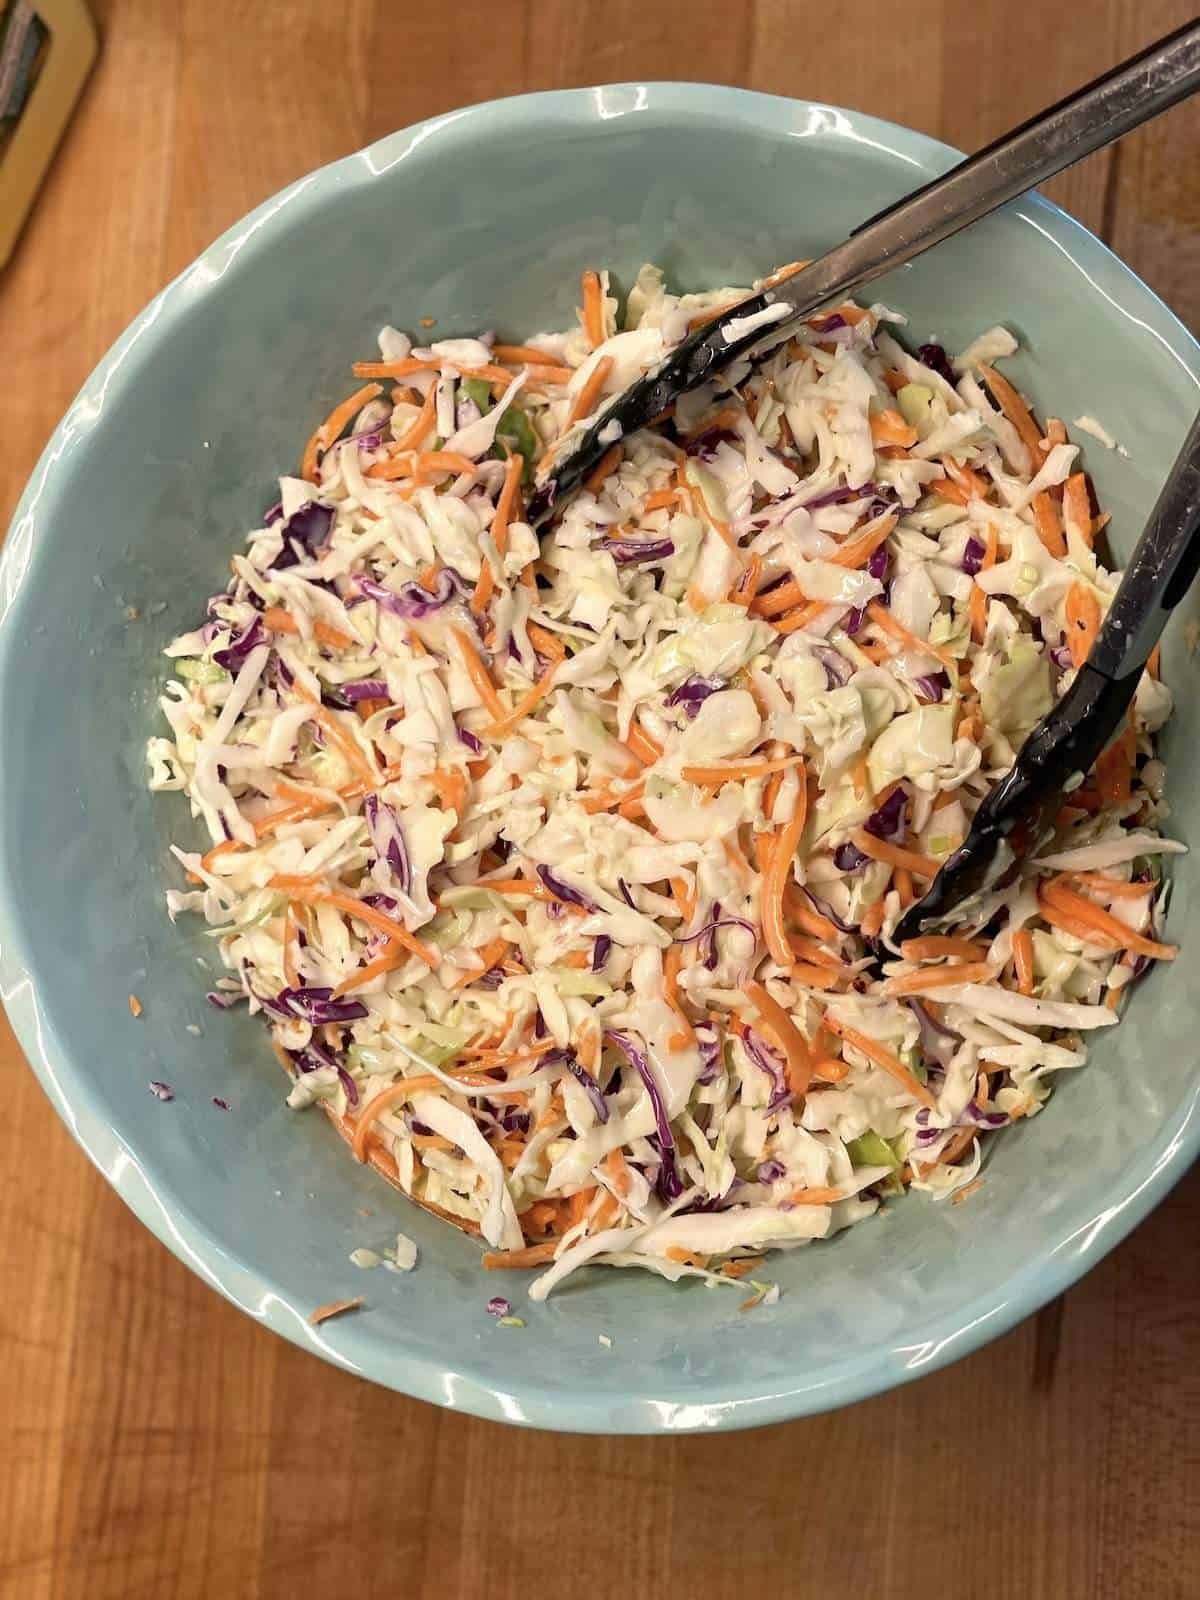 A bowl of shredded cabbage and carrots coated in coleslaw dressing.